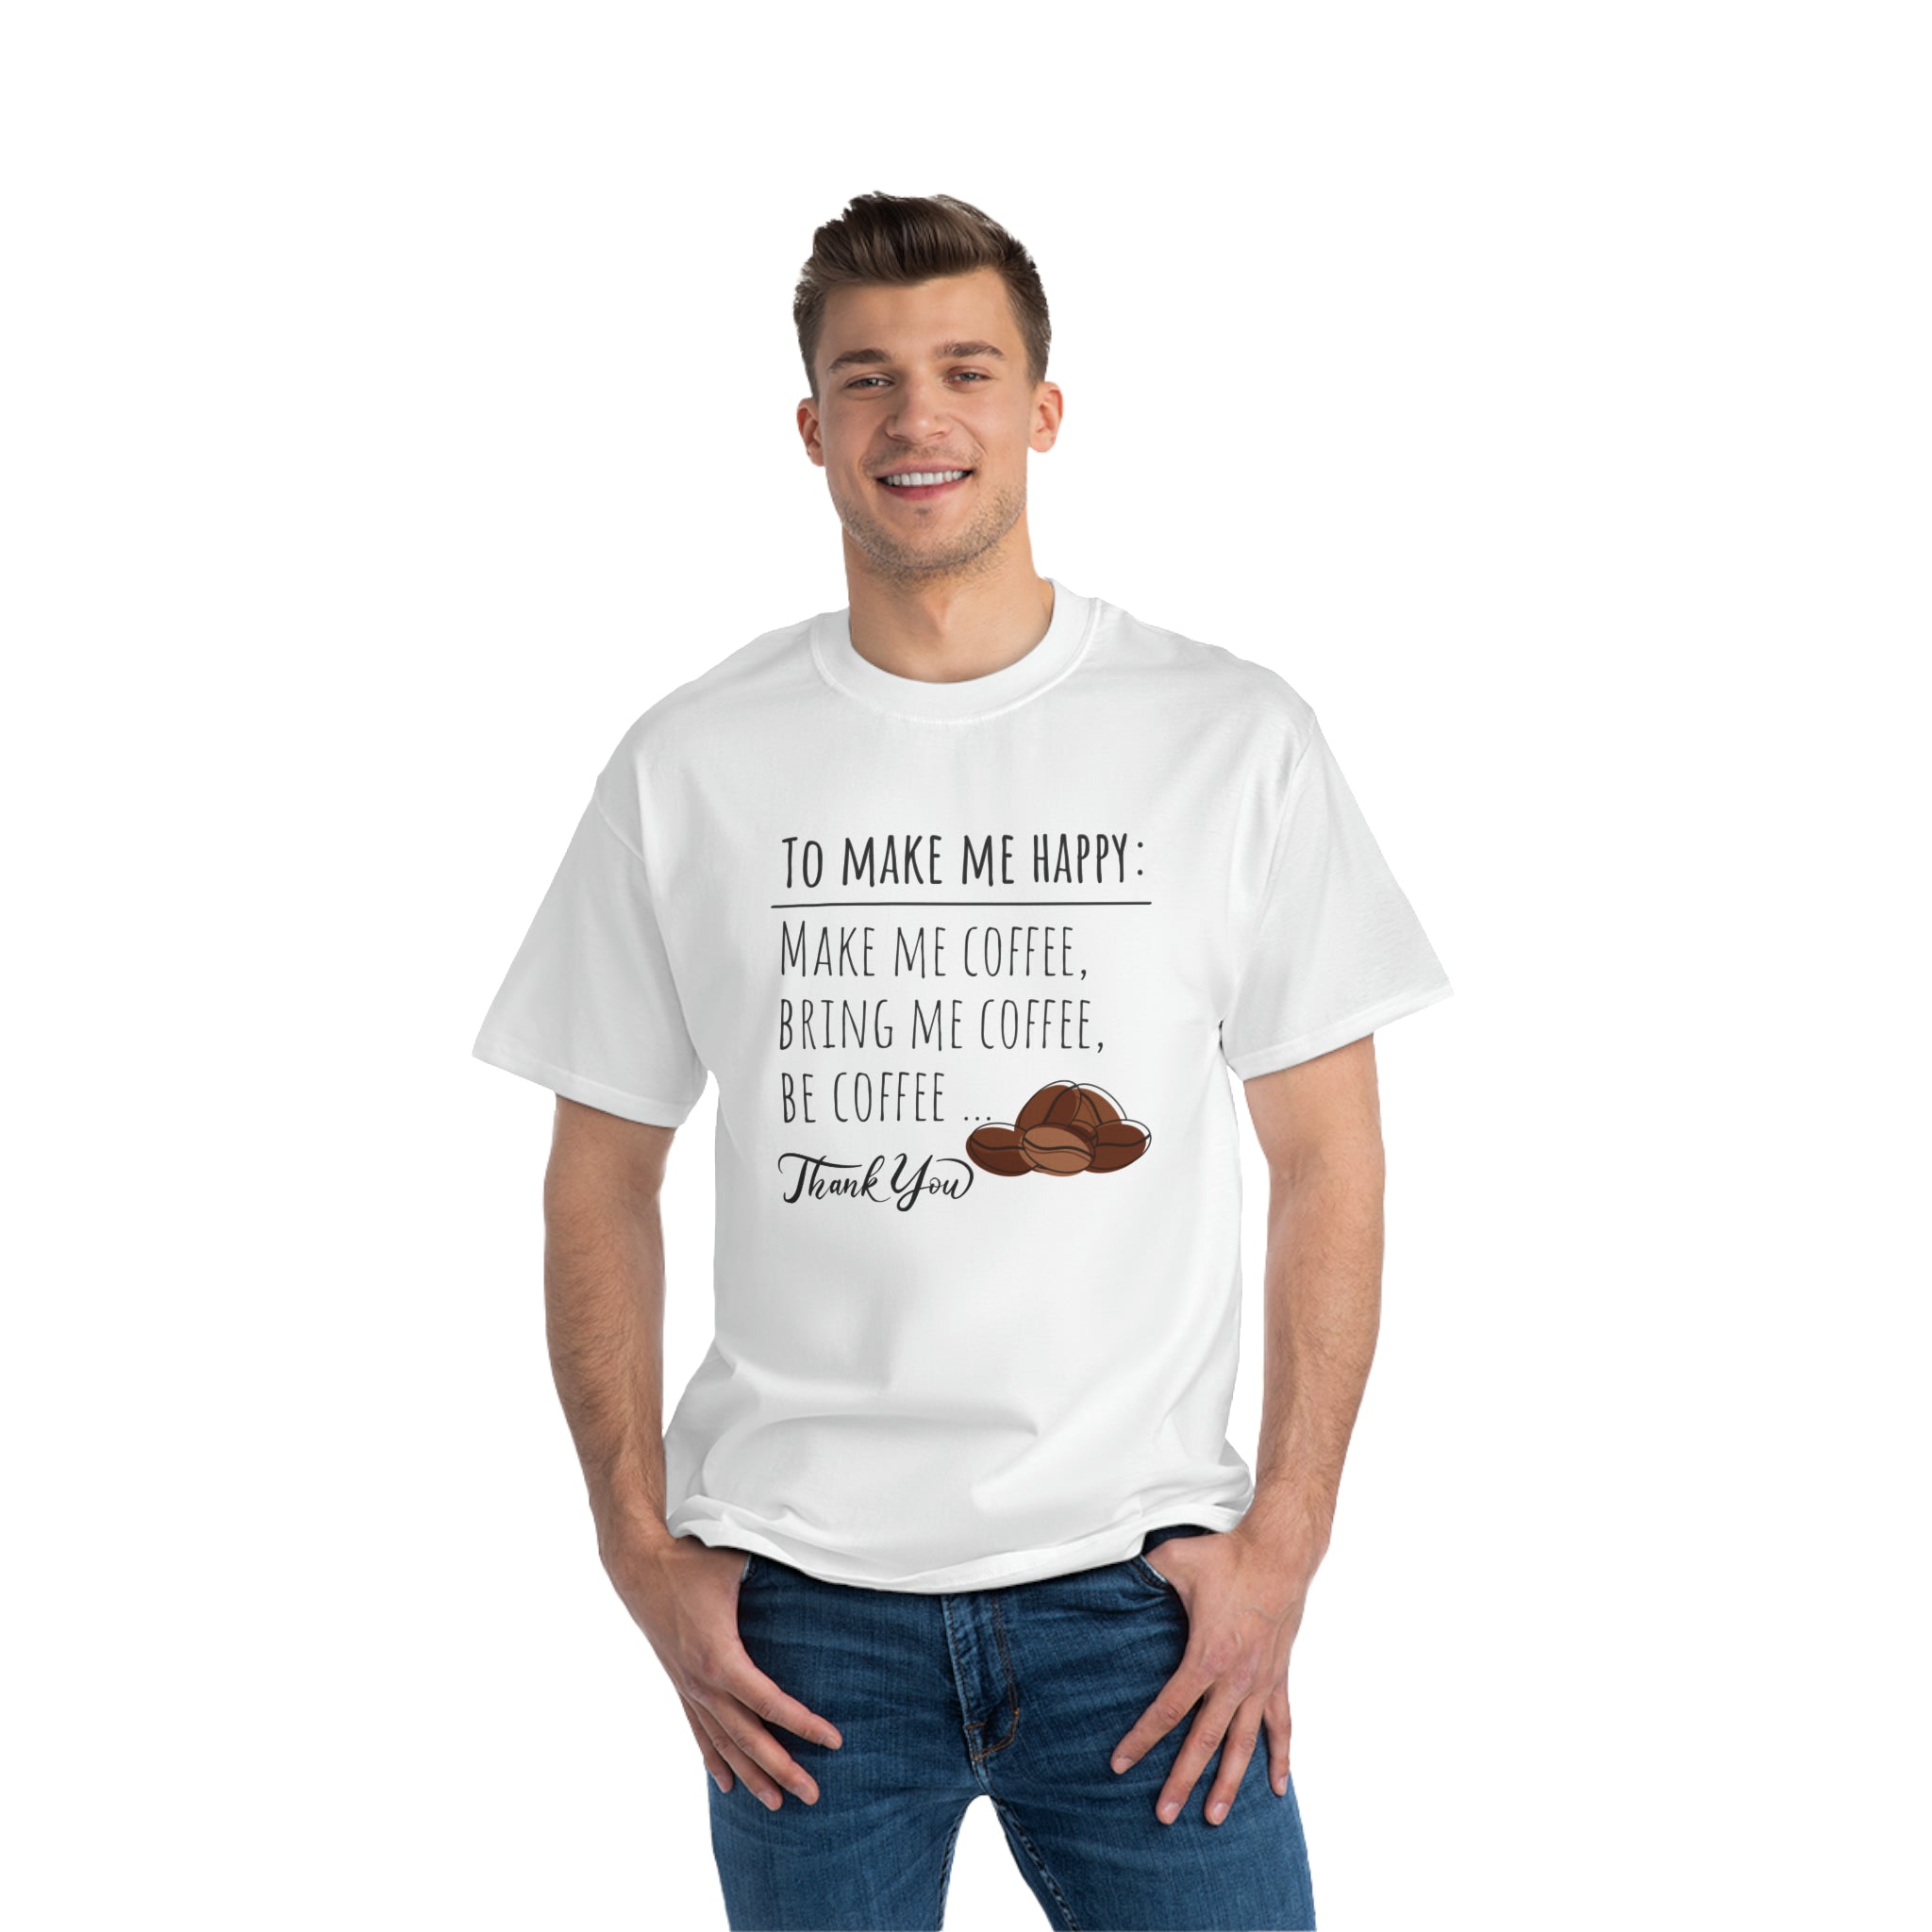 Be the talk of the Coffee Shop. Coffee Lover's T-Shirt - 'To Make me Happy Bring Coffee...' - Comfortable Short-Sleeve Tee Shirt Gift for Coffee Drinkers Shirt for Casual Friday's